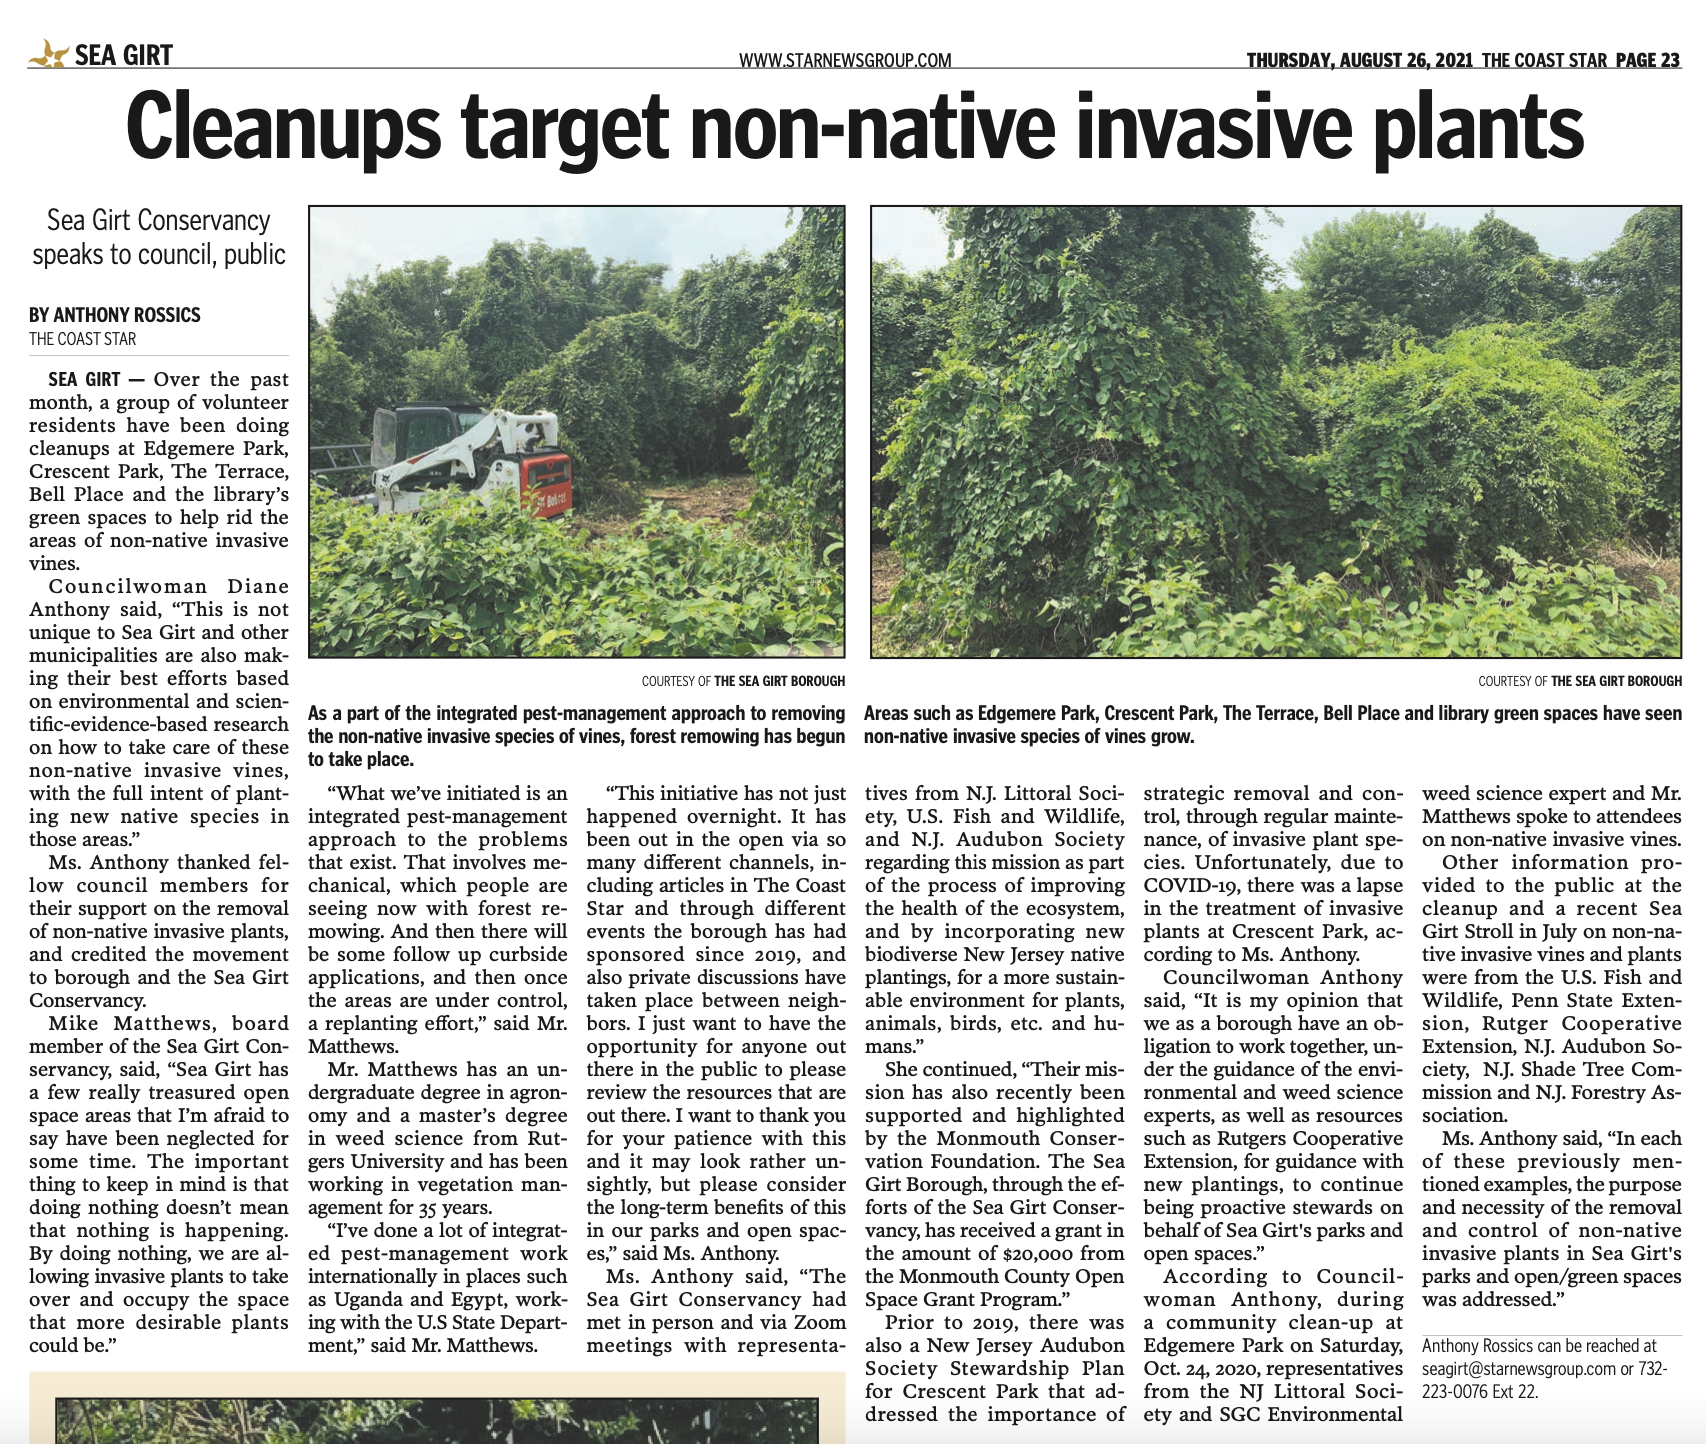 Cleanups target non-native invasive plants originally posted in The Coast Star